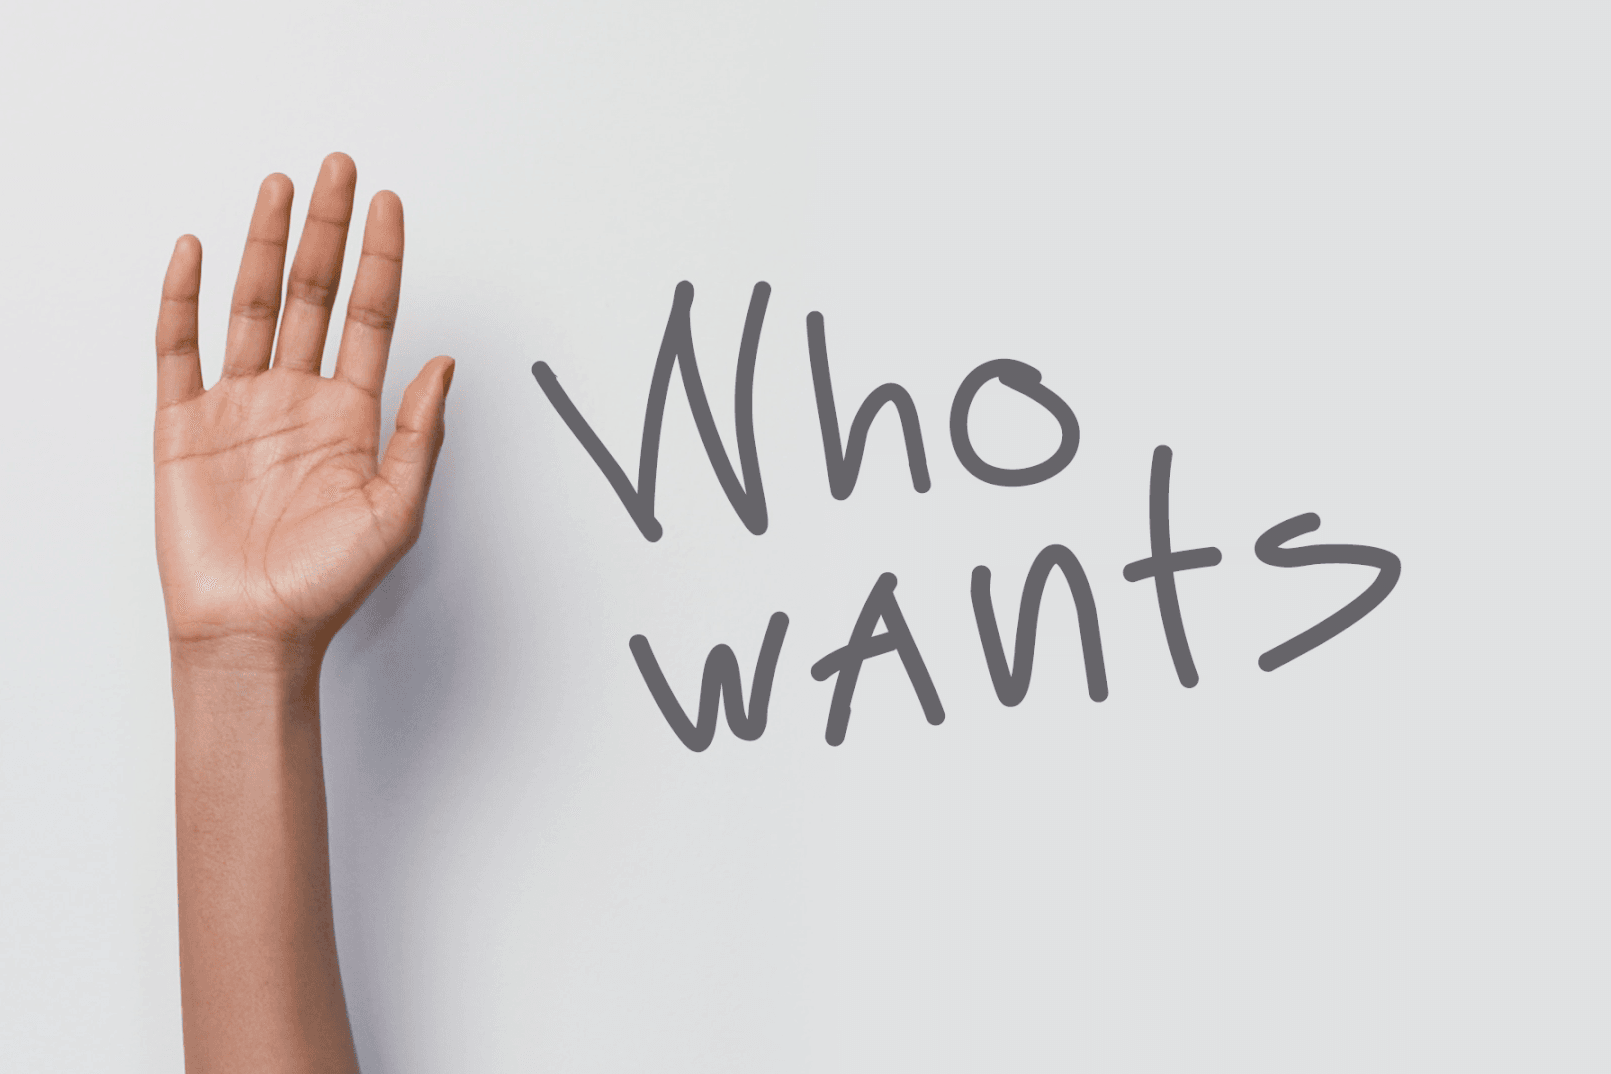 A tan hand with grey capitalize text "Who Wants" on the right of the hand, representing Option For Homes new branding for their social media video campaigns